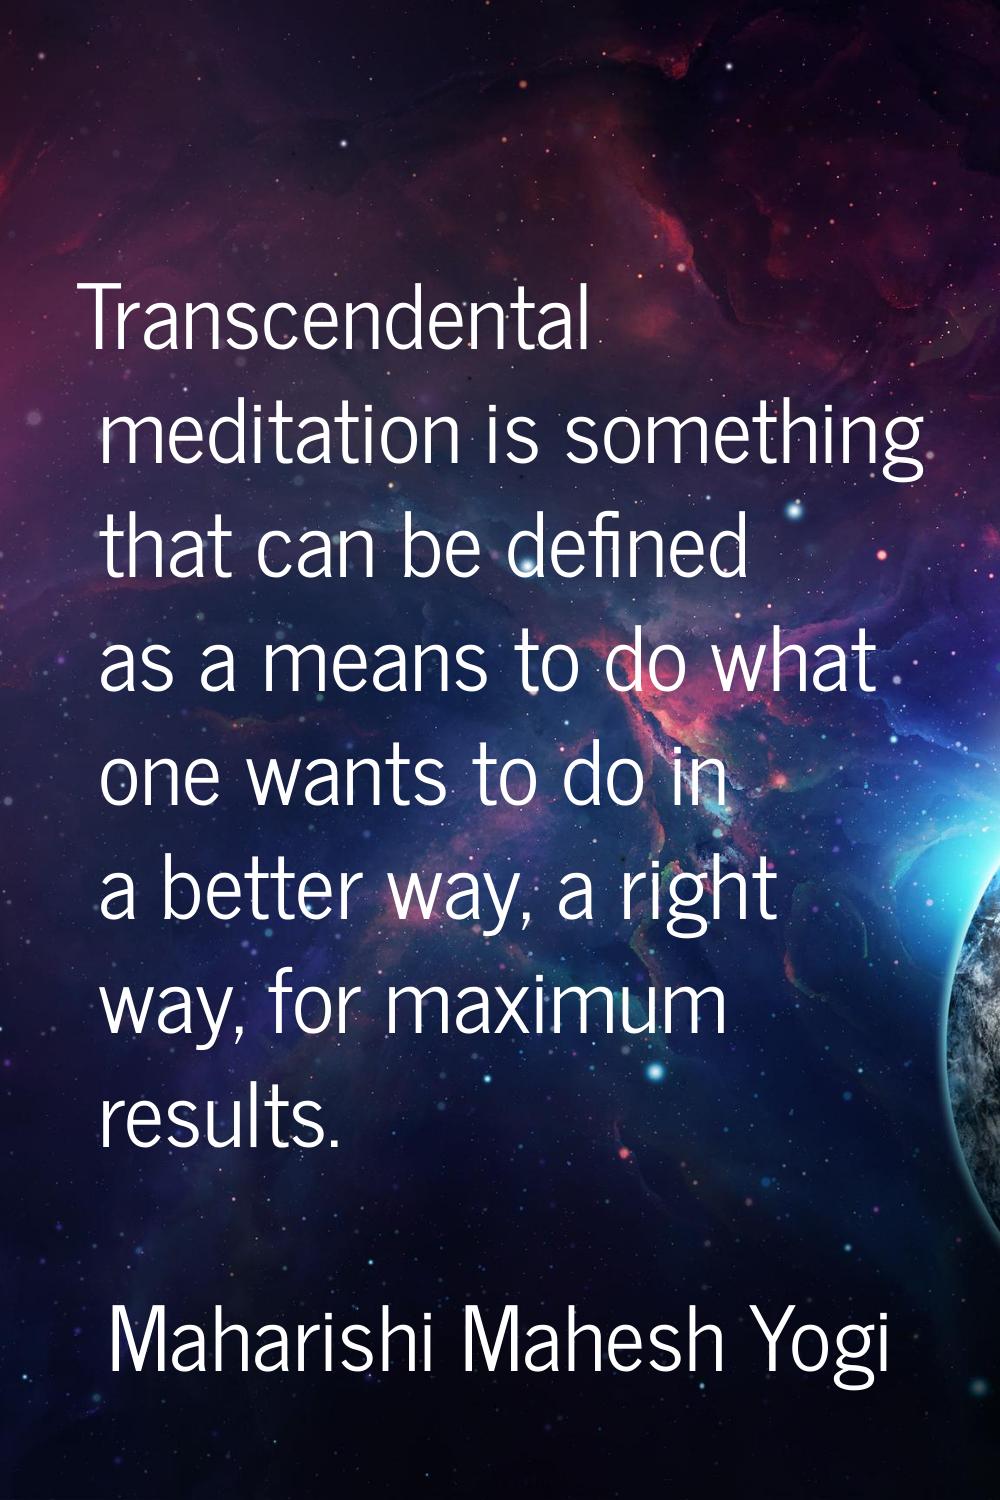 Transcendental meditation is something that can be defined as a means to do what one wants to do in